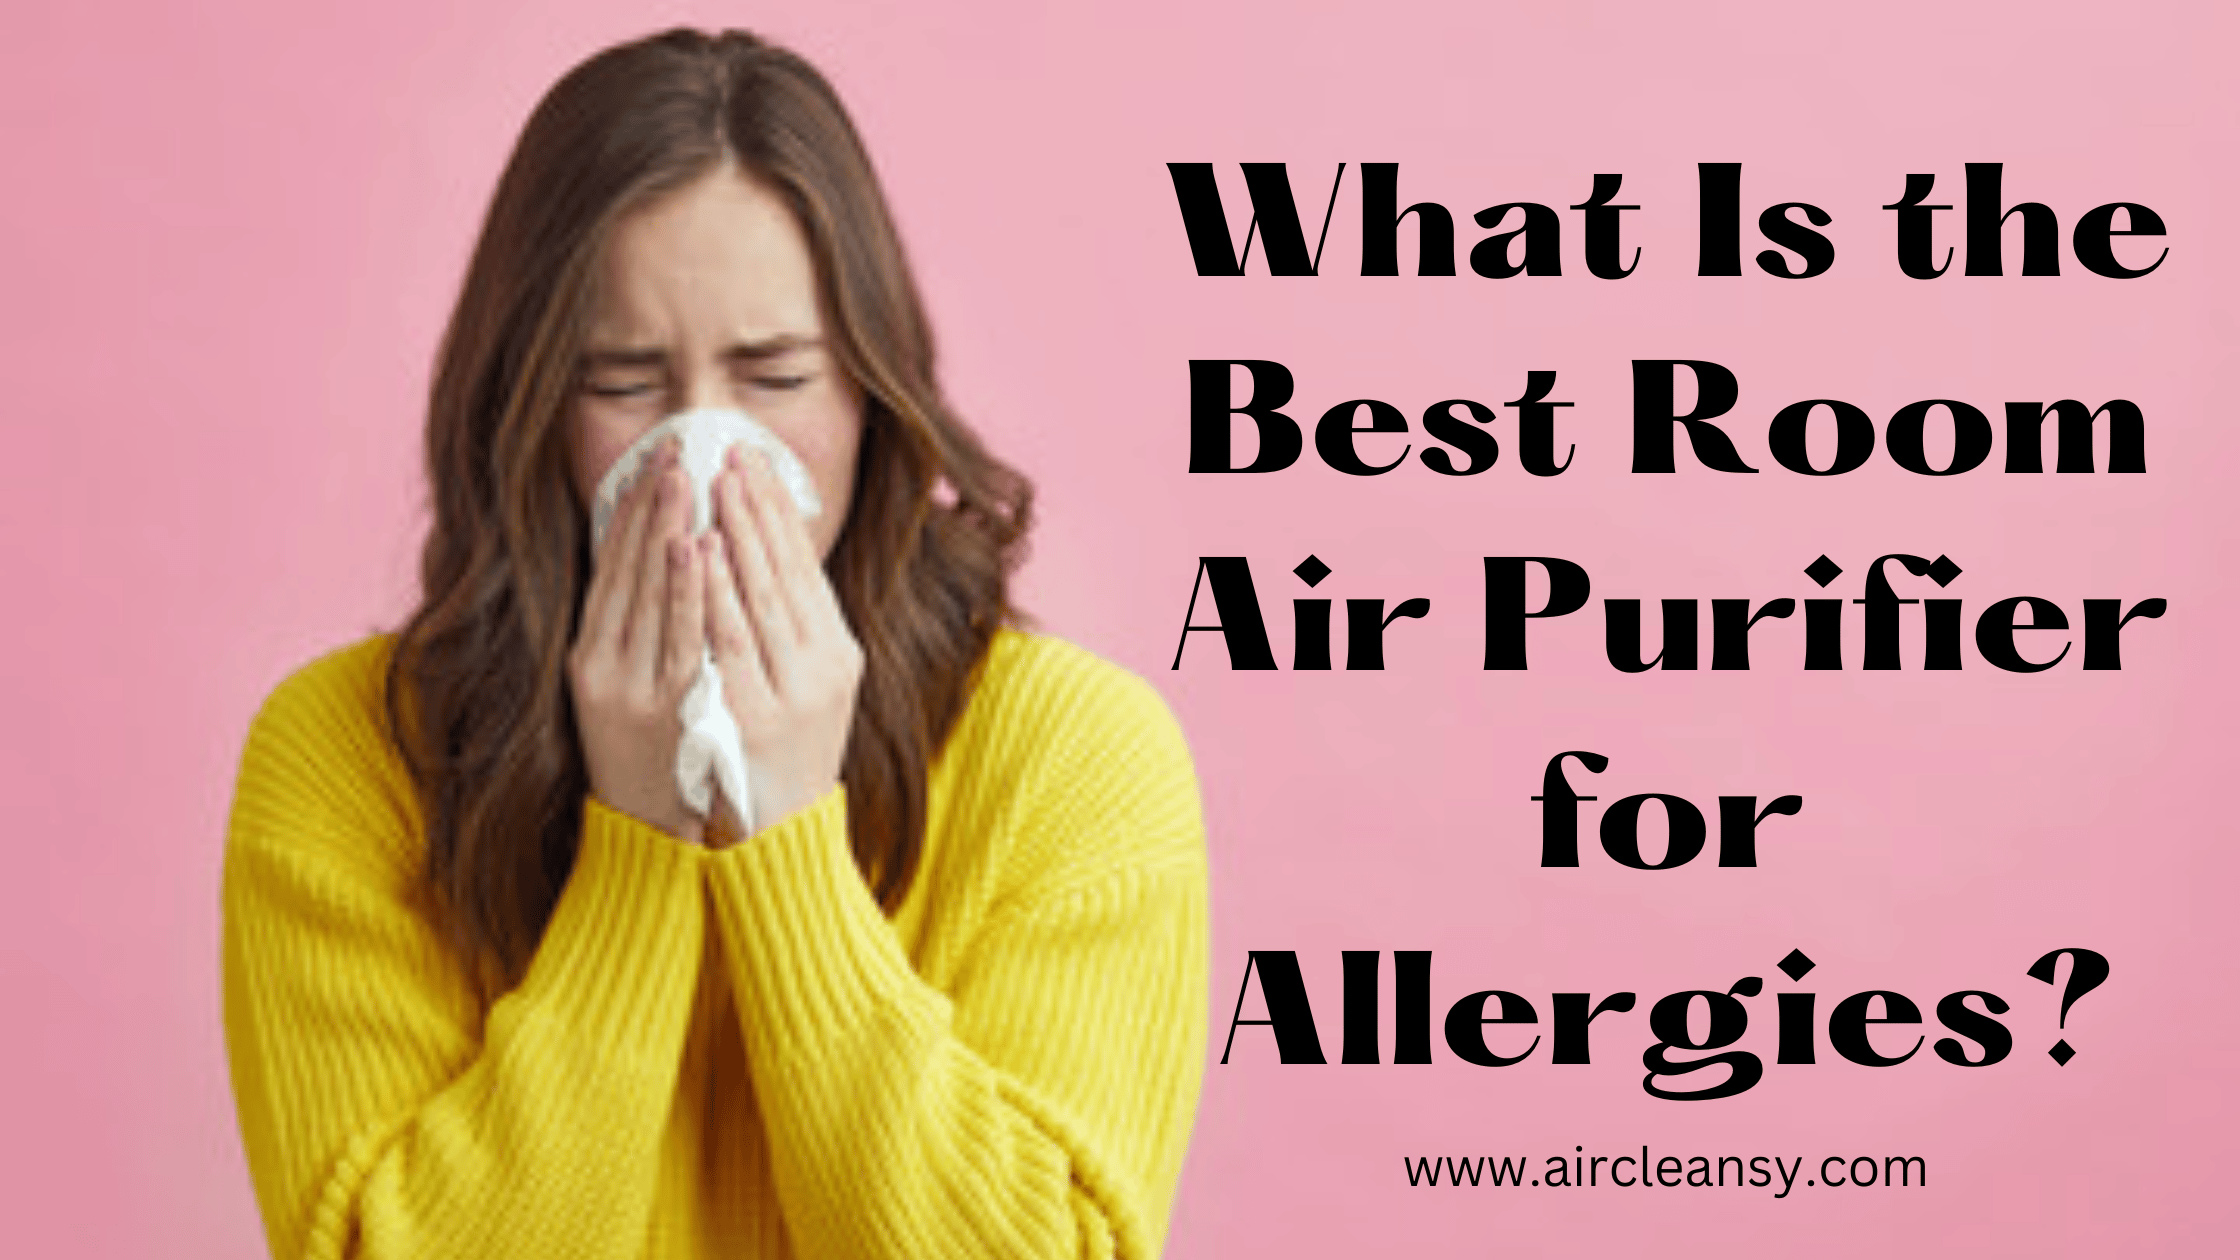 What Is the Best Room Air Purifier for Allergies